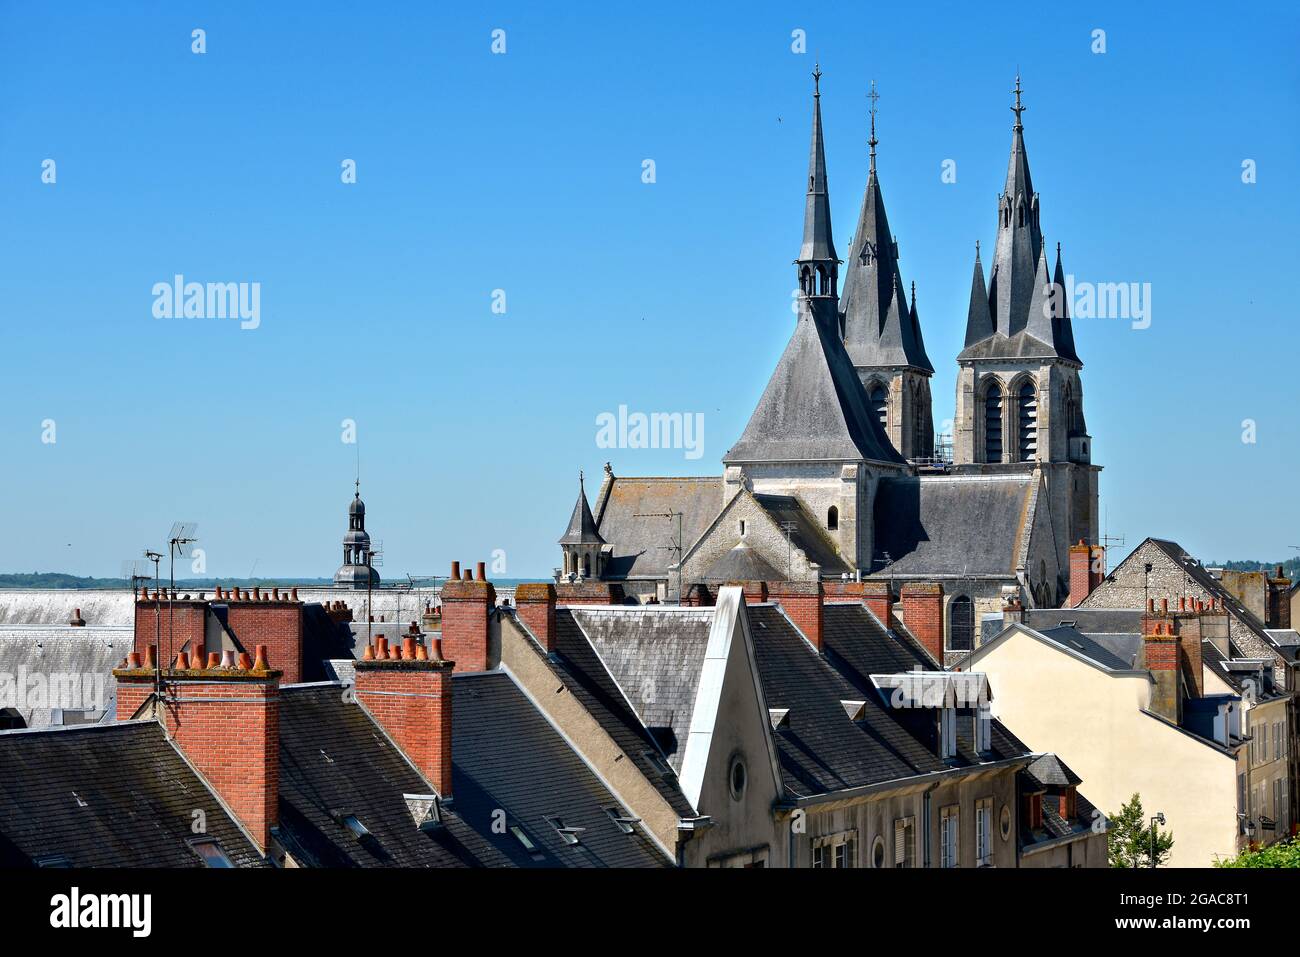 Church Saint Nicolas seen from the roofs at Blois, a commune and the capital city of Loir-et-Cher department in Centre-Val de Loire in France Stock Photo